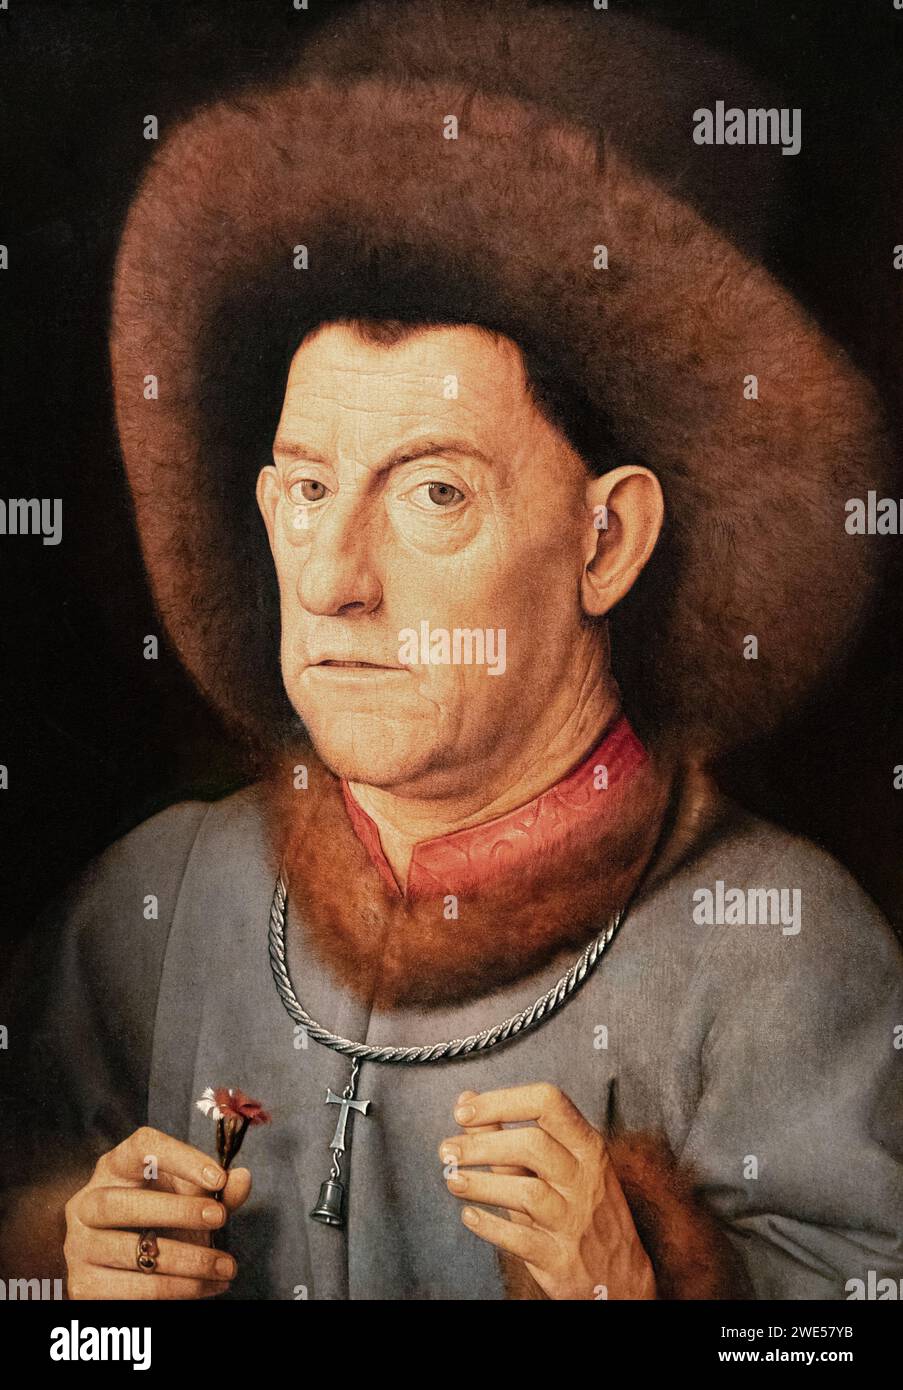 Copy after a Jan van Eyck painting; 'The Man with the Pinks' c. 1520. Portrait of a man with flowers, A later variation on a lost Van Eyck painting. Stock Photo